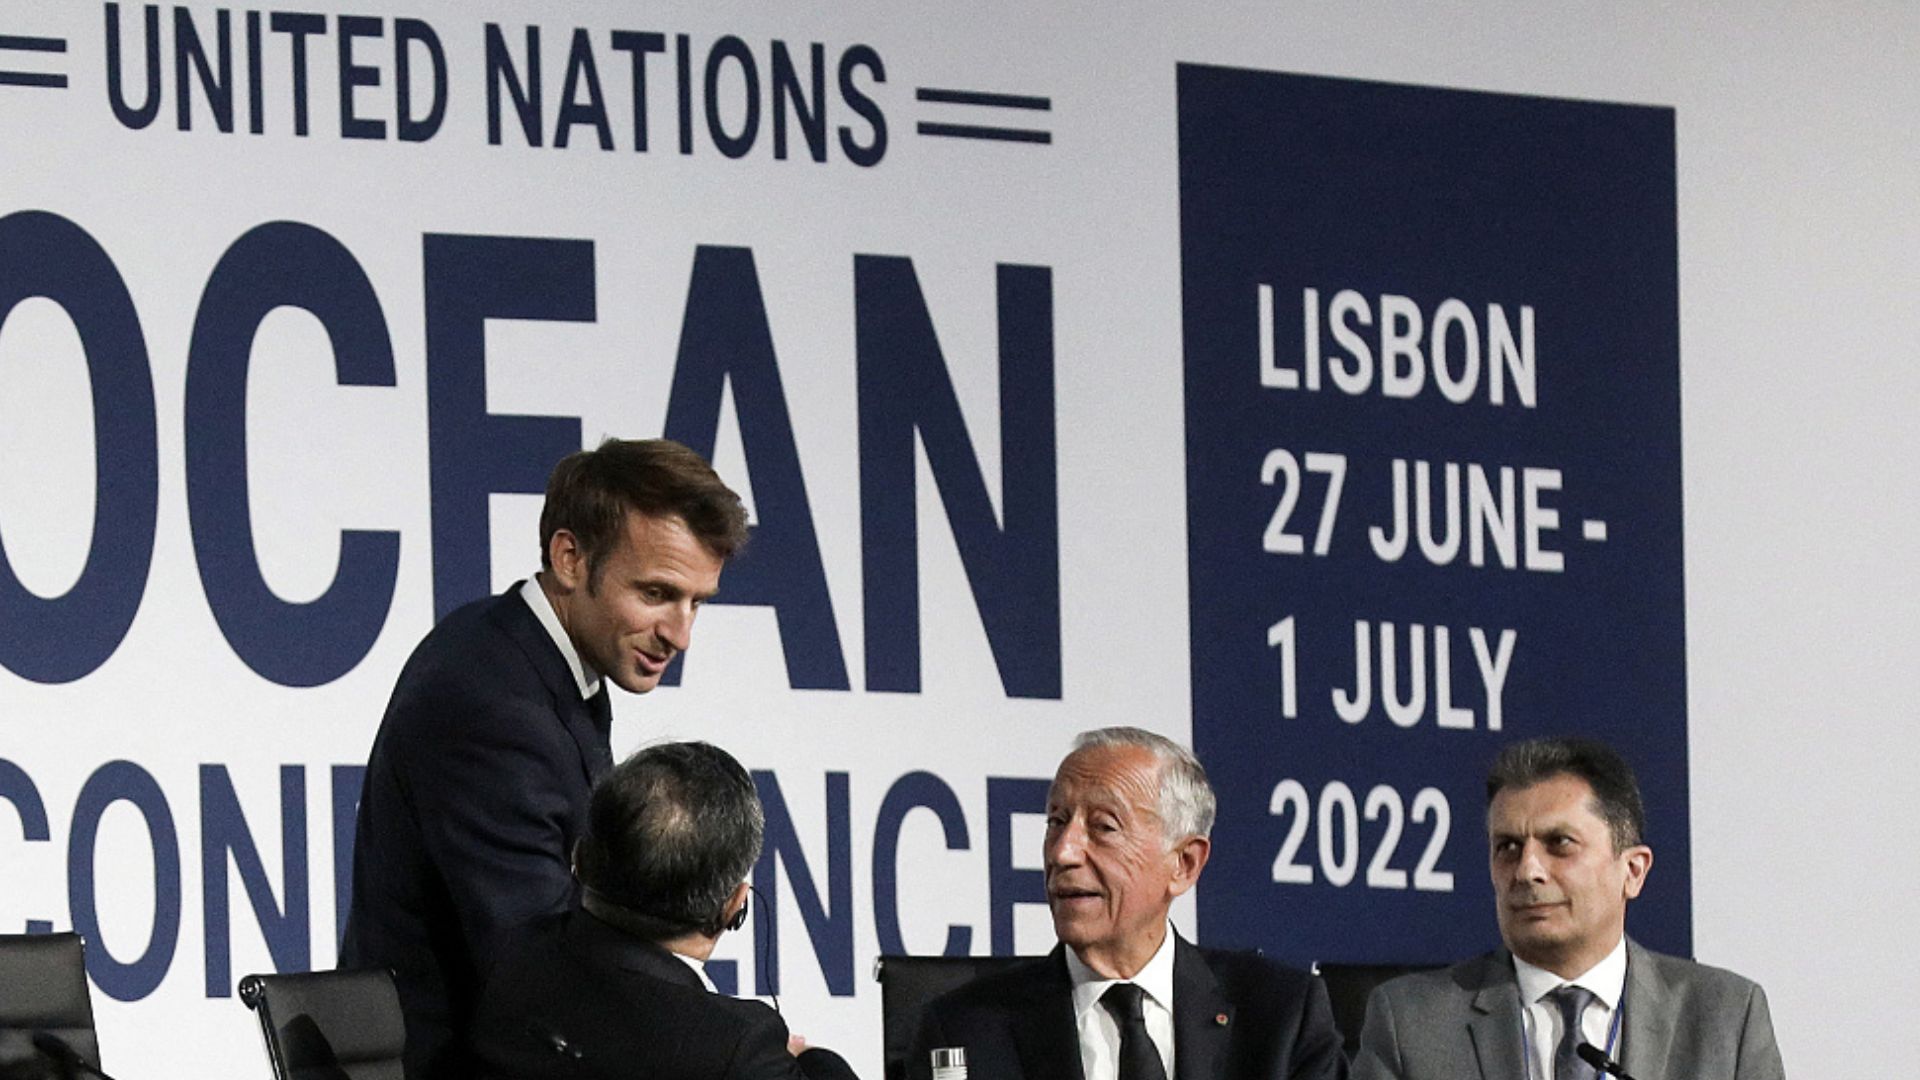 French President Emmanuel Macron at Lisbon’s 2022 UN Ocean Conference which agreed on banning deep-sea mining. /CFP